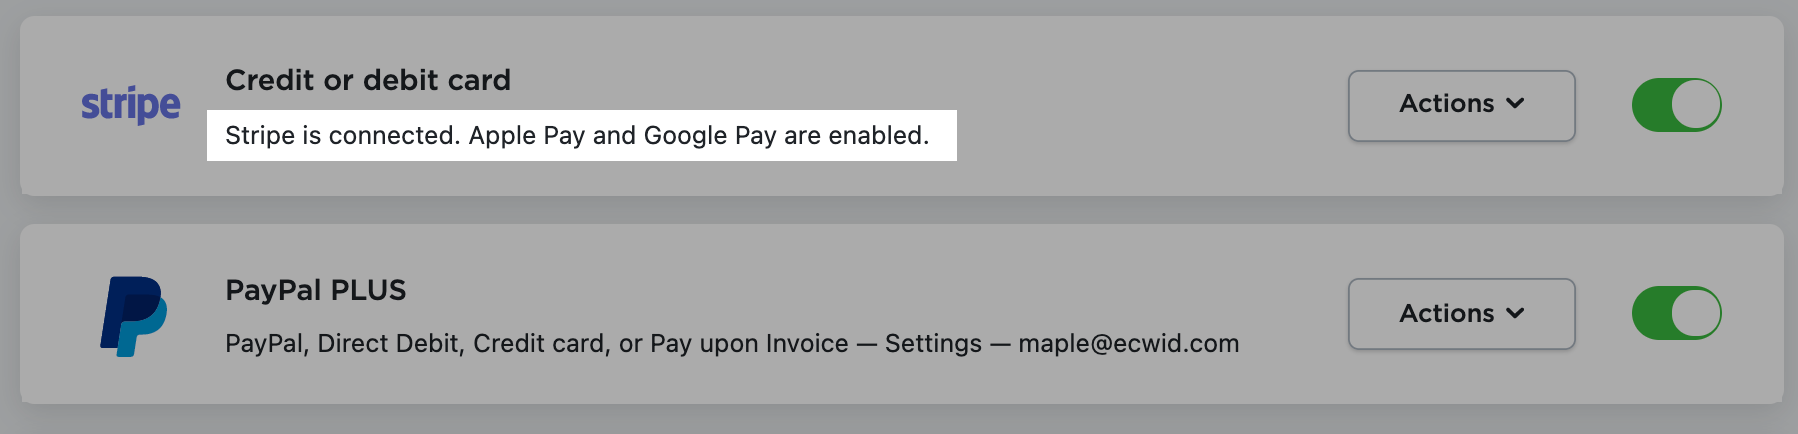 enable_apple_and_google_pay.png